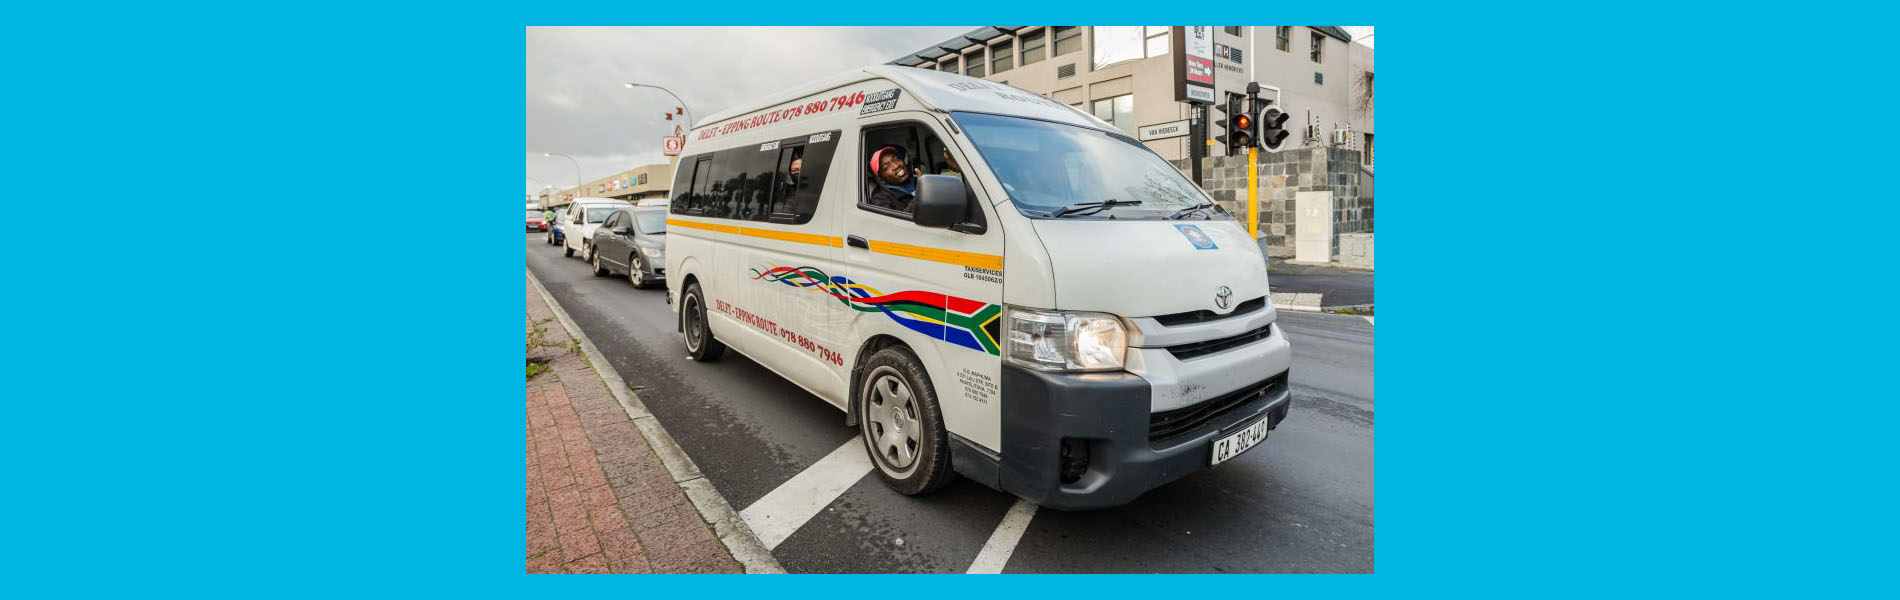 Ray of hope for sub-Saharan Africa’s paratransit: solar charging of urban electric minibus taxis in South Africa